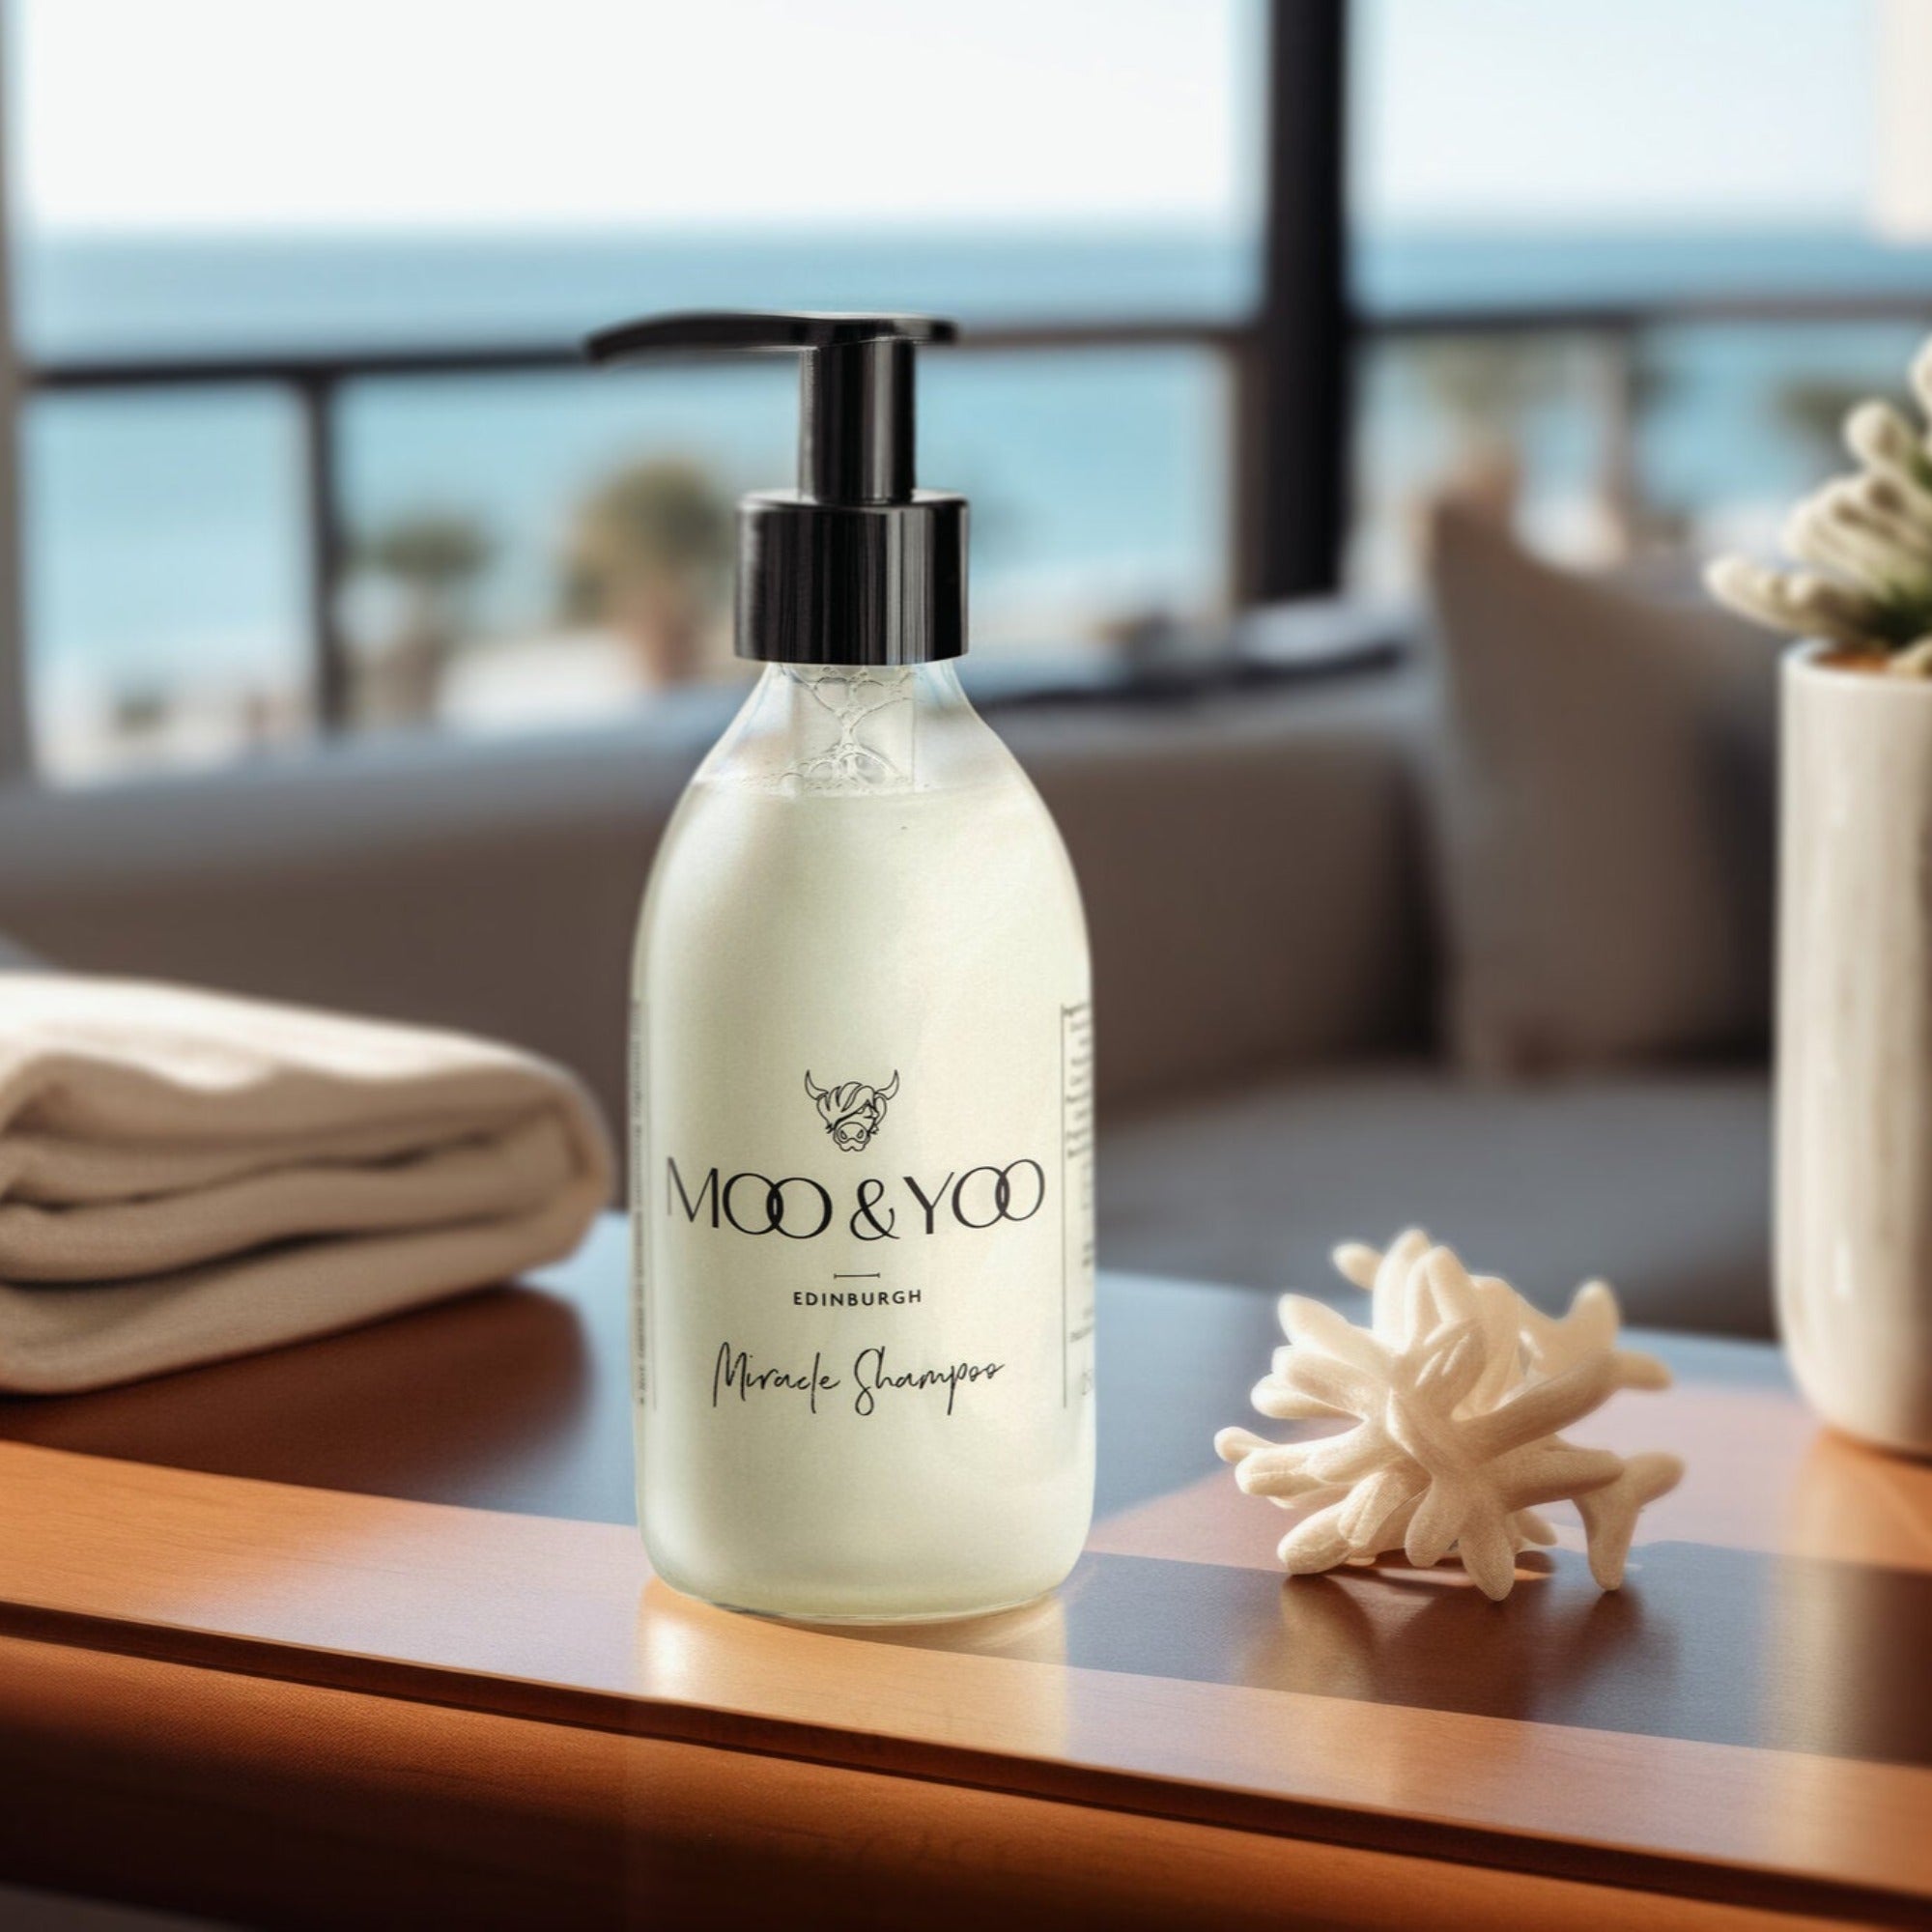 A close up image of a glass bottle of Moo and Yoo Miracle shampoo with a pump . It is placed on table in a hotel suite. There is a folded towel to one side and a plant to the other.  In the hazy background you can see a beach and the sea.